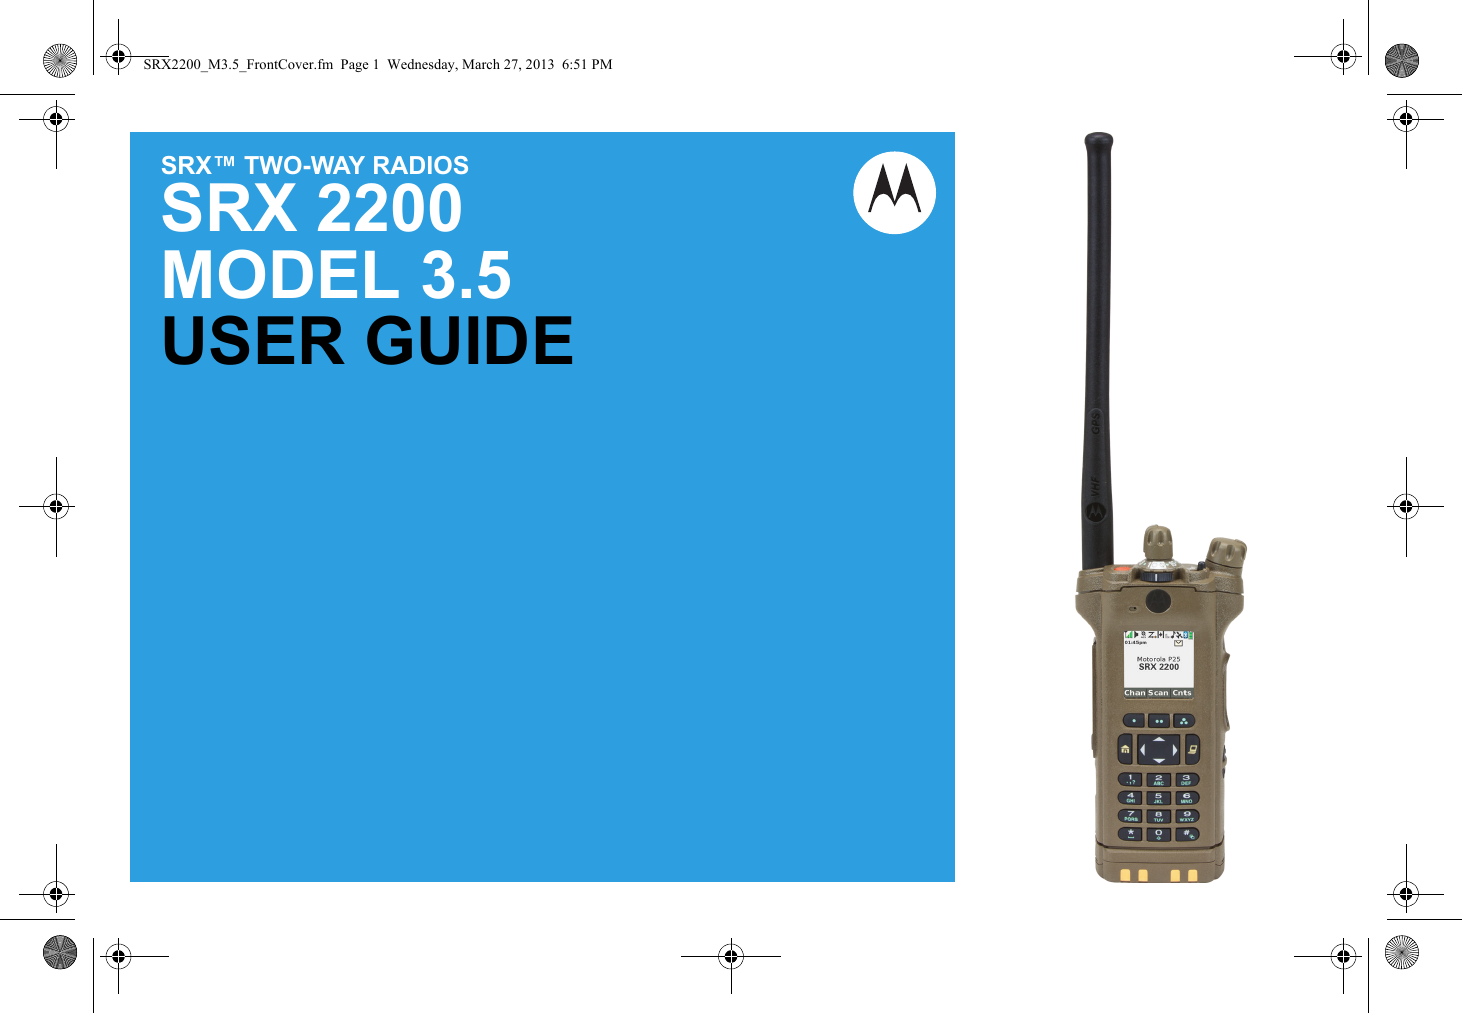 SRX™ TWO-WAY RADIOSSRX 2200MODEL 3.5USER GUIDESRX2200_M3.5_FrontCover.fm  Page 1  Wednesday, March 27, 2013  6:51 PM